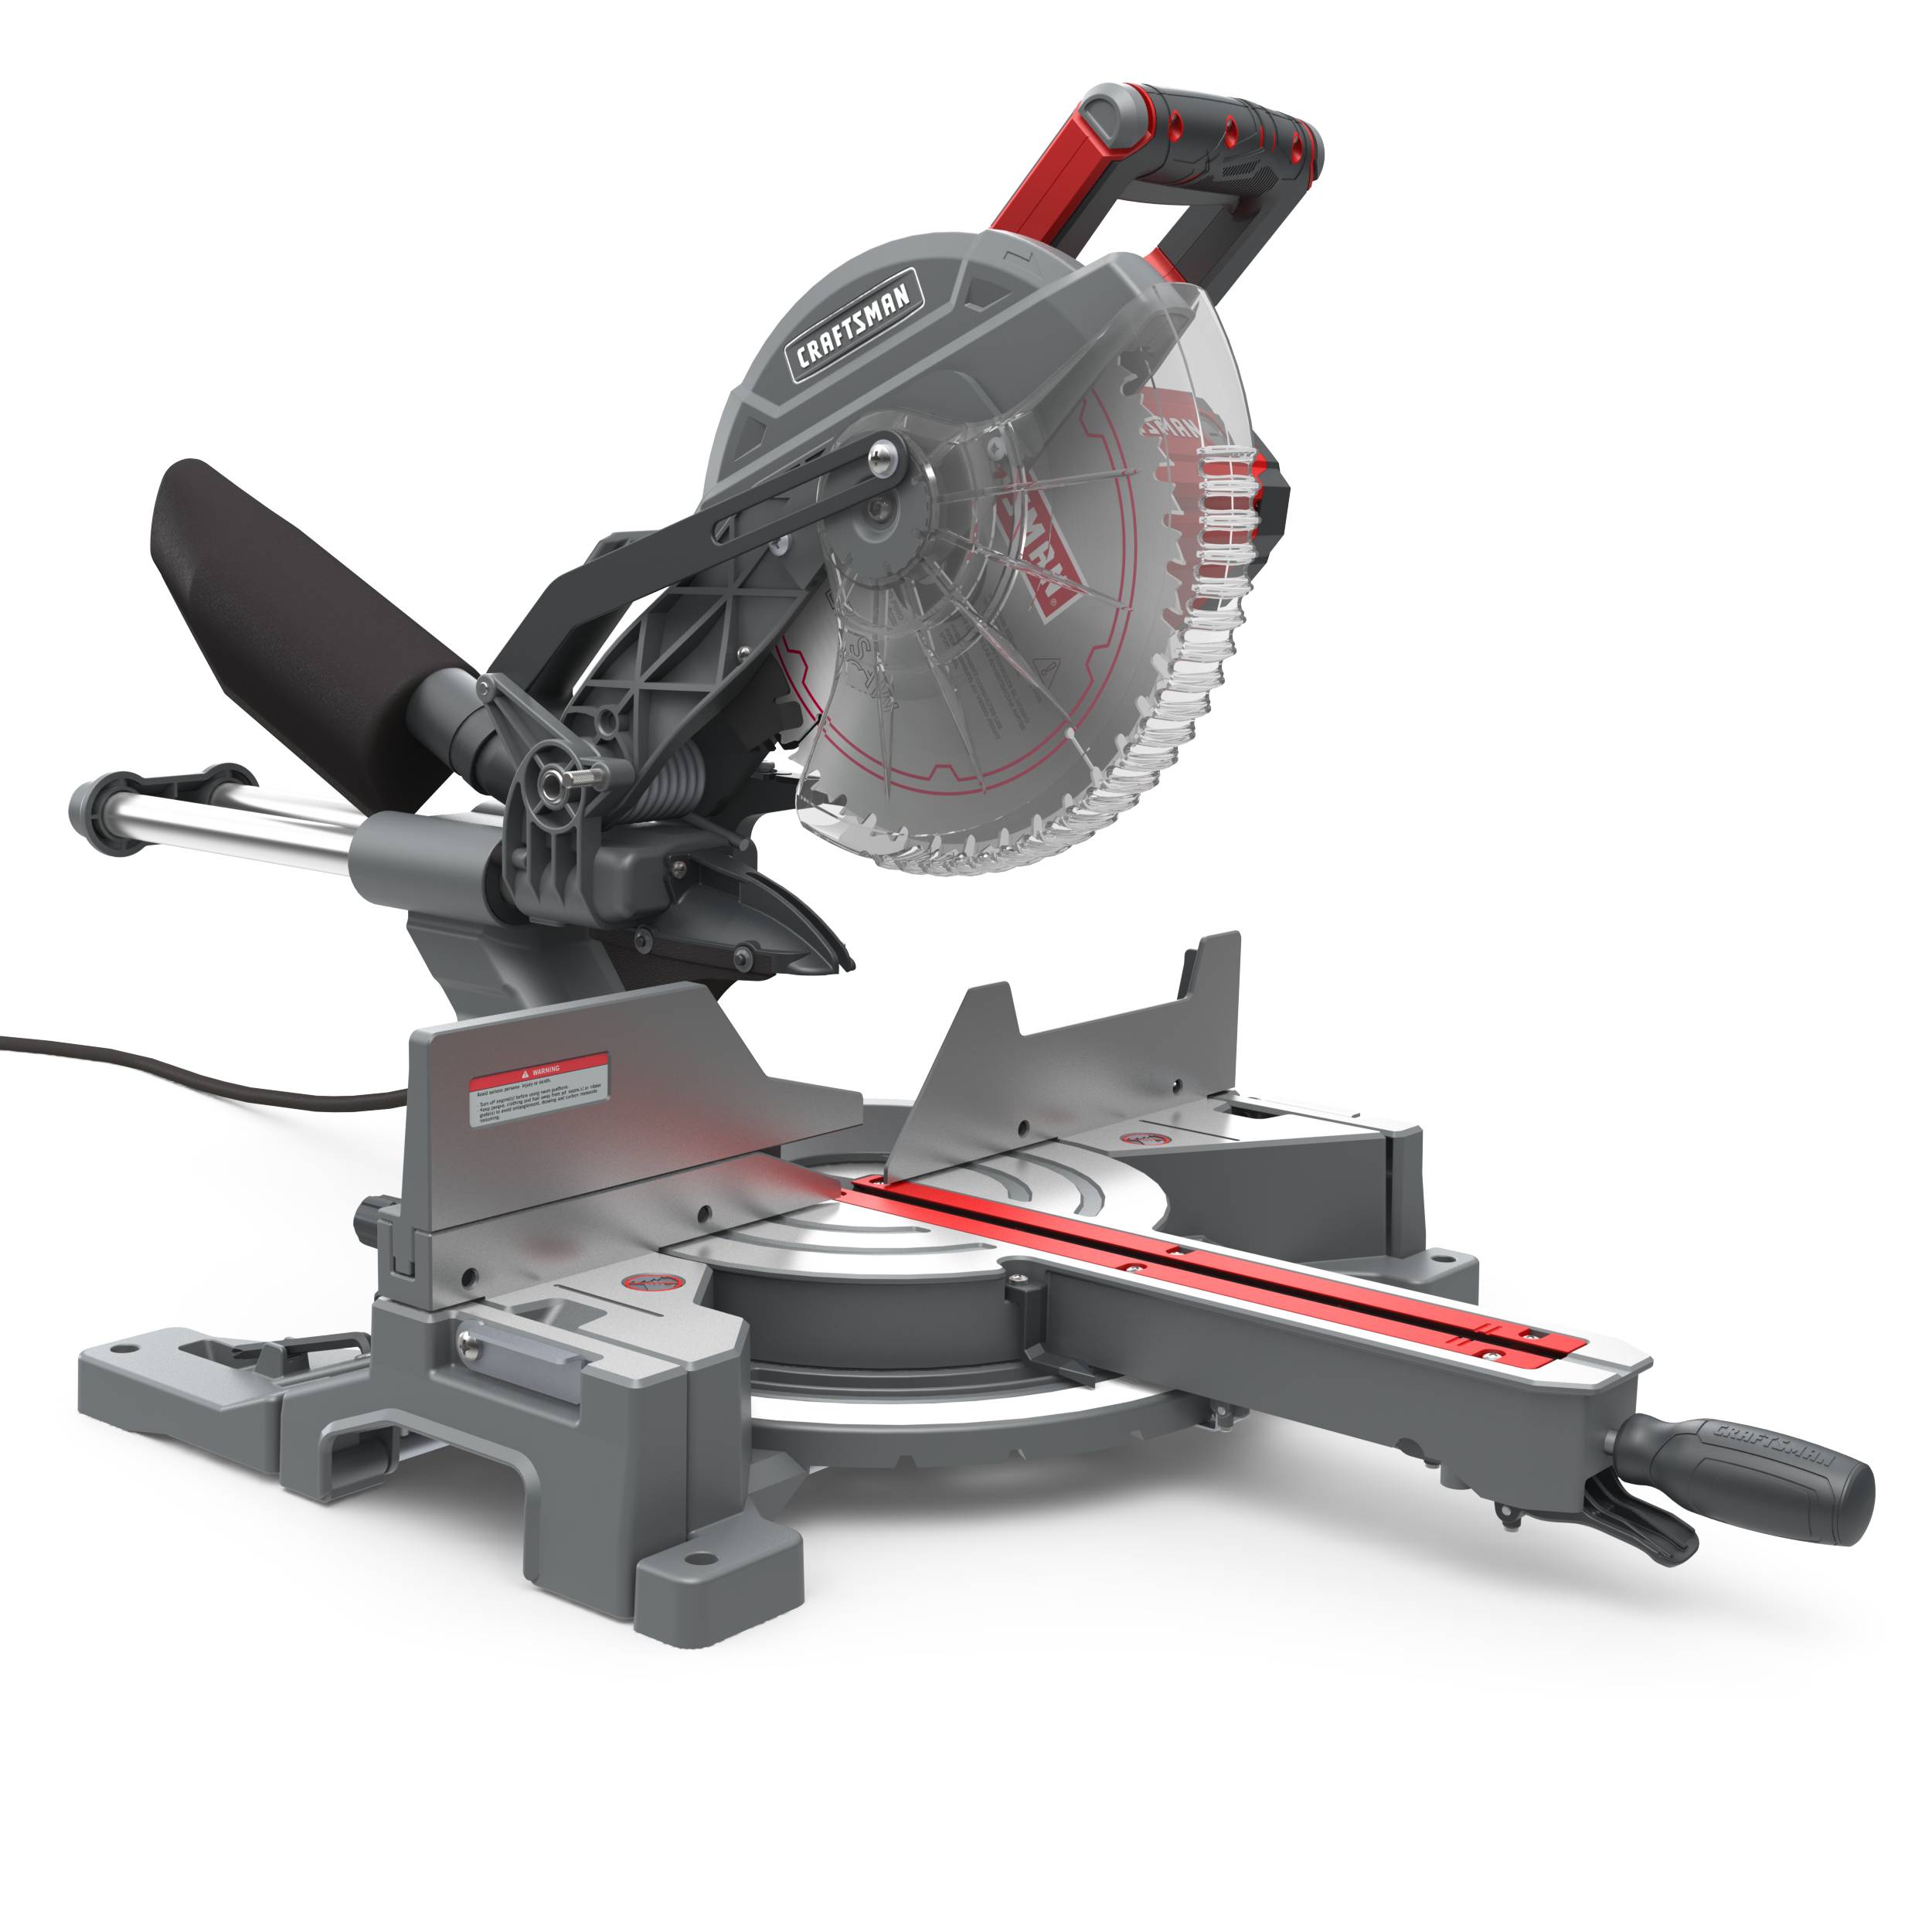 14 Amp Corded 10 in. Compound Miter Saw with LED Cutline Indicator - 1